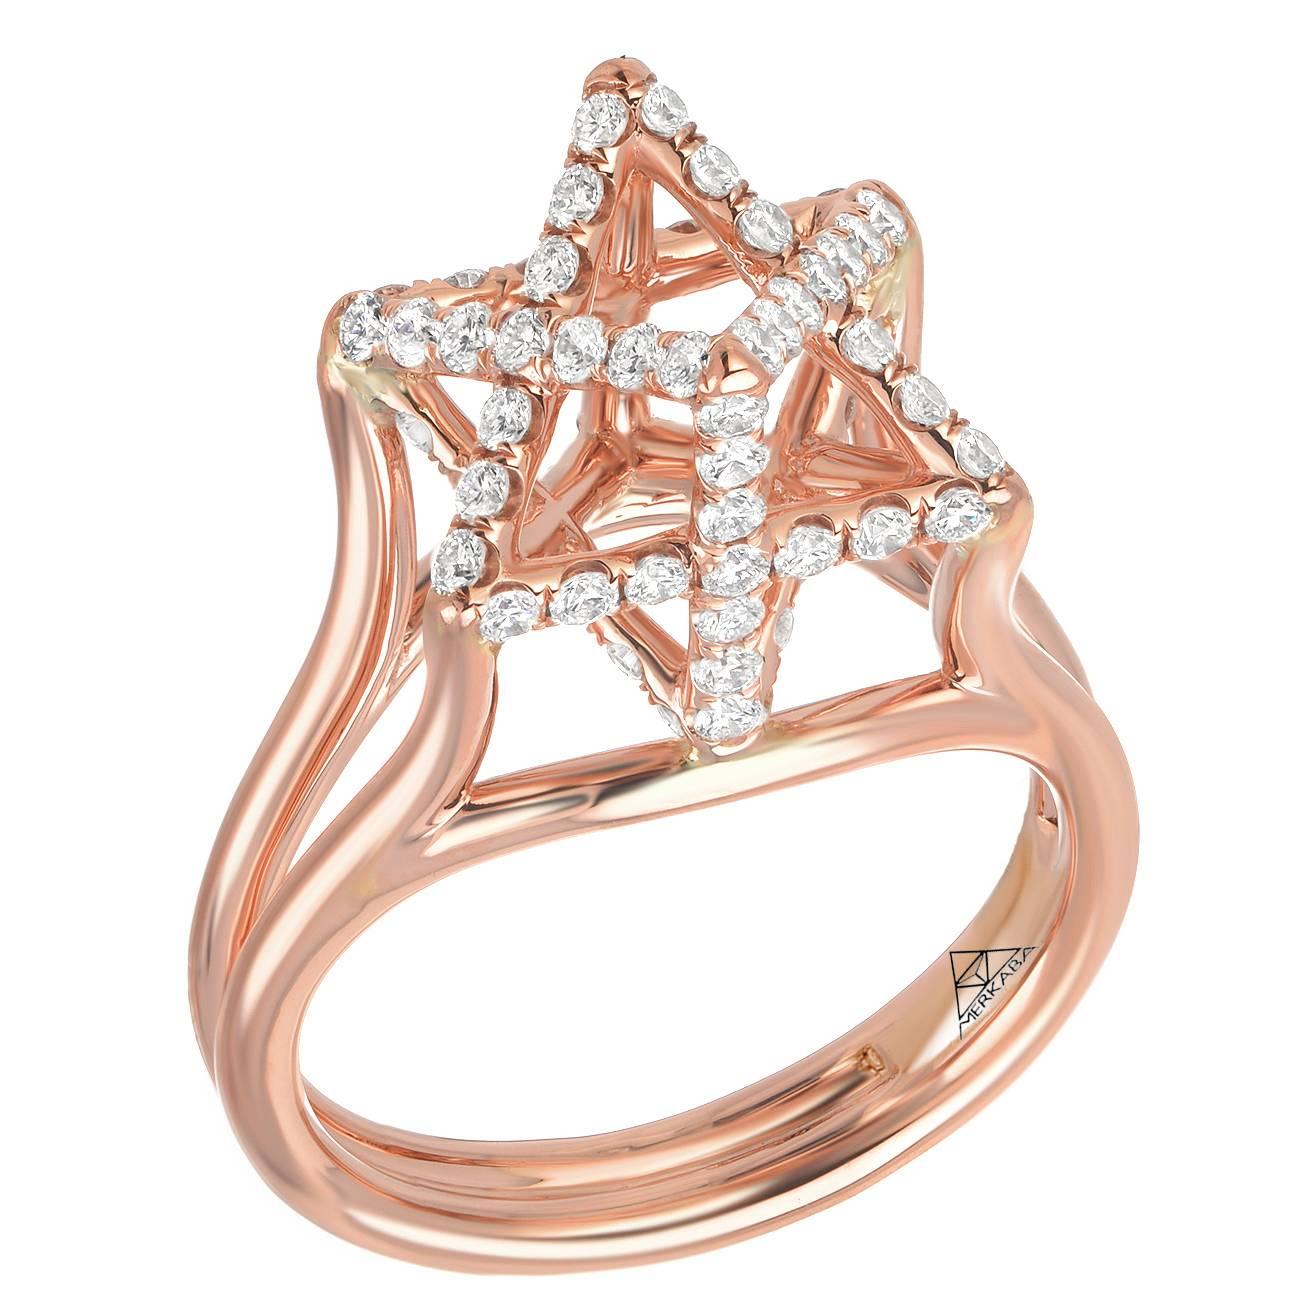 This Merkaba heirloom-quality 18k rose gold ring features a total of approximately 0.98 carats of round brilliant diamonds of F-G color and VVS2-VS1 clarity. This dramatic, sculptural design extends upward from the hand 0.43”, a stunning